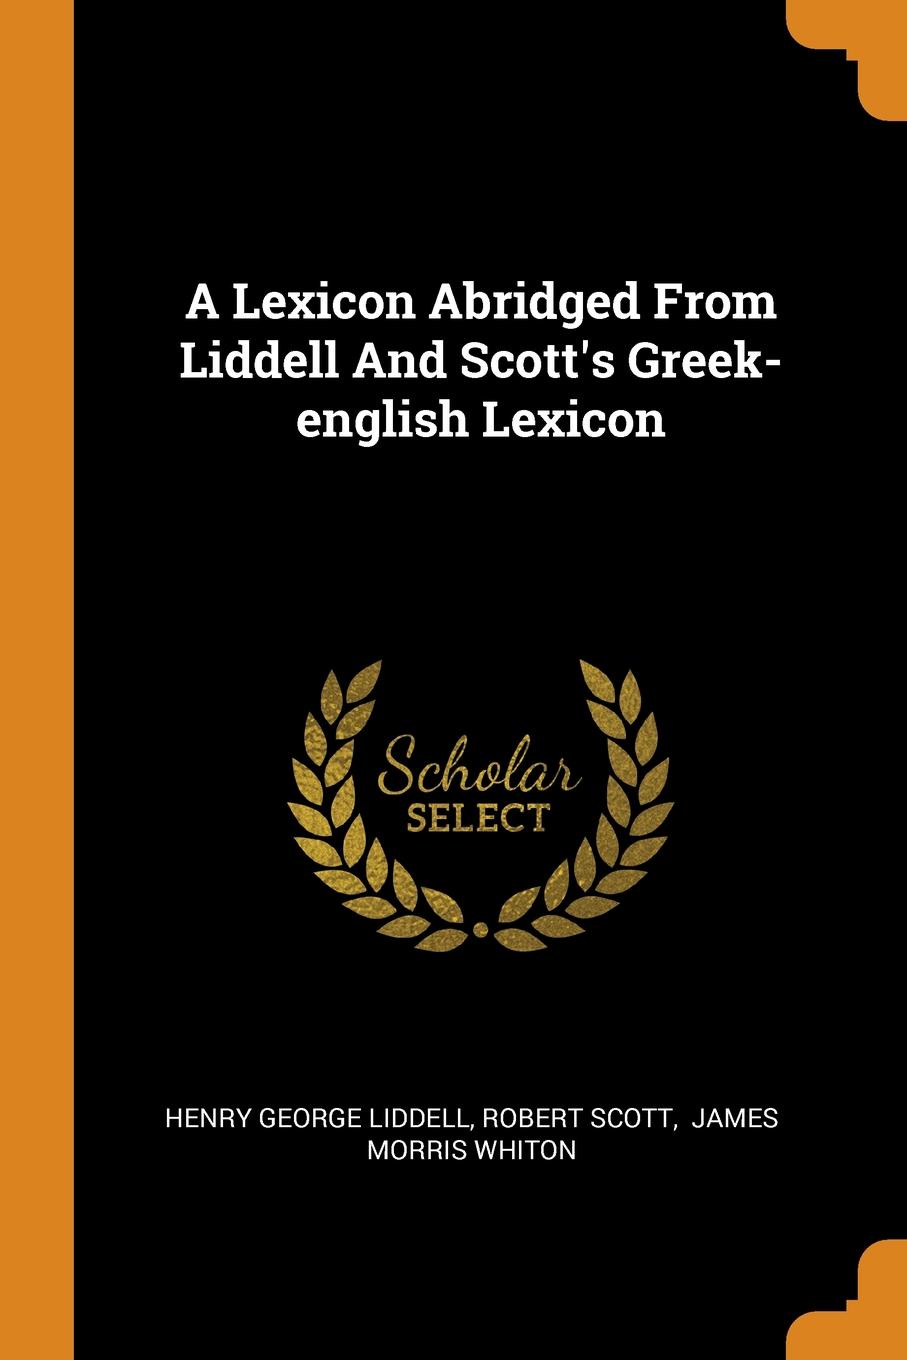 A Lexicon Abridged From Liddell And Scott.s Greek-english Lexicon